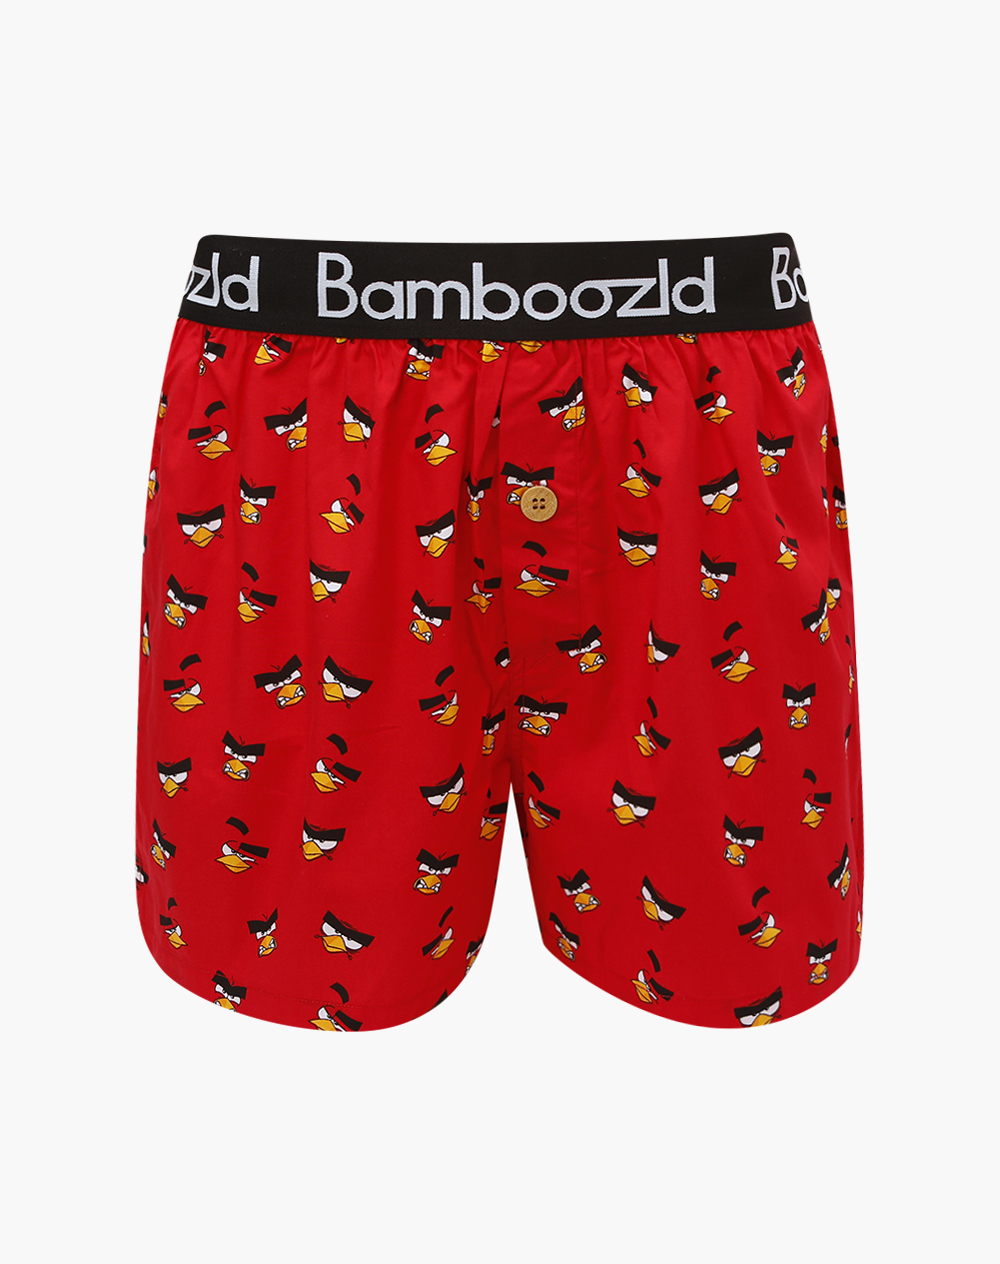 MENS ANGRY BIRDS RED BAMBOO BOXER SHORT